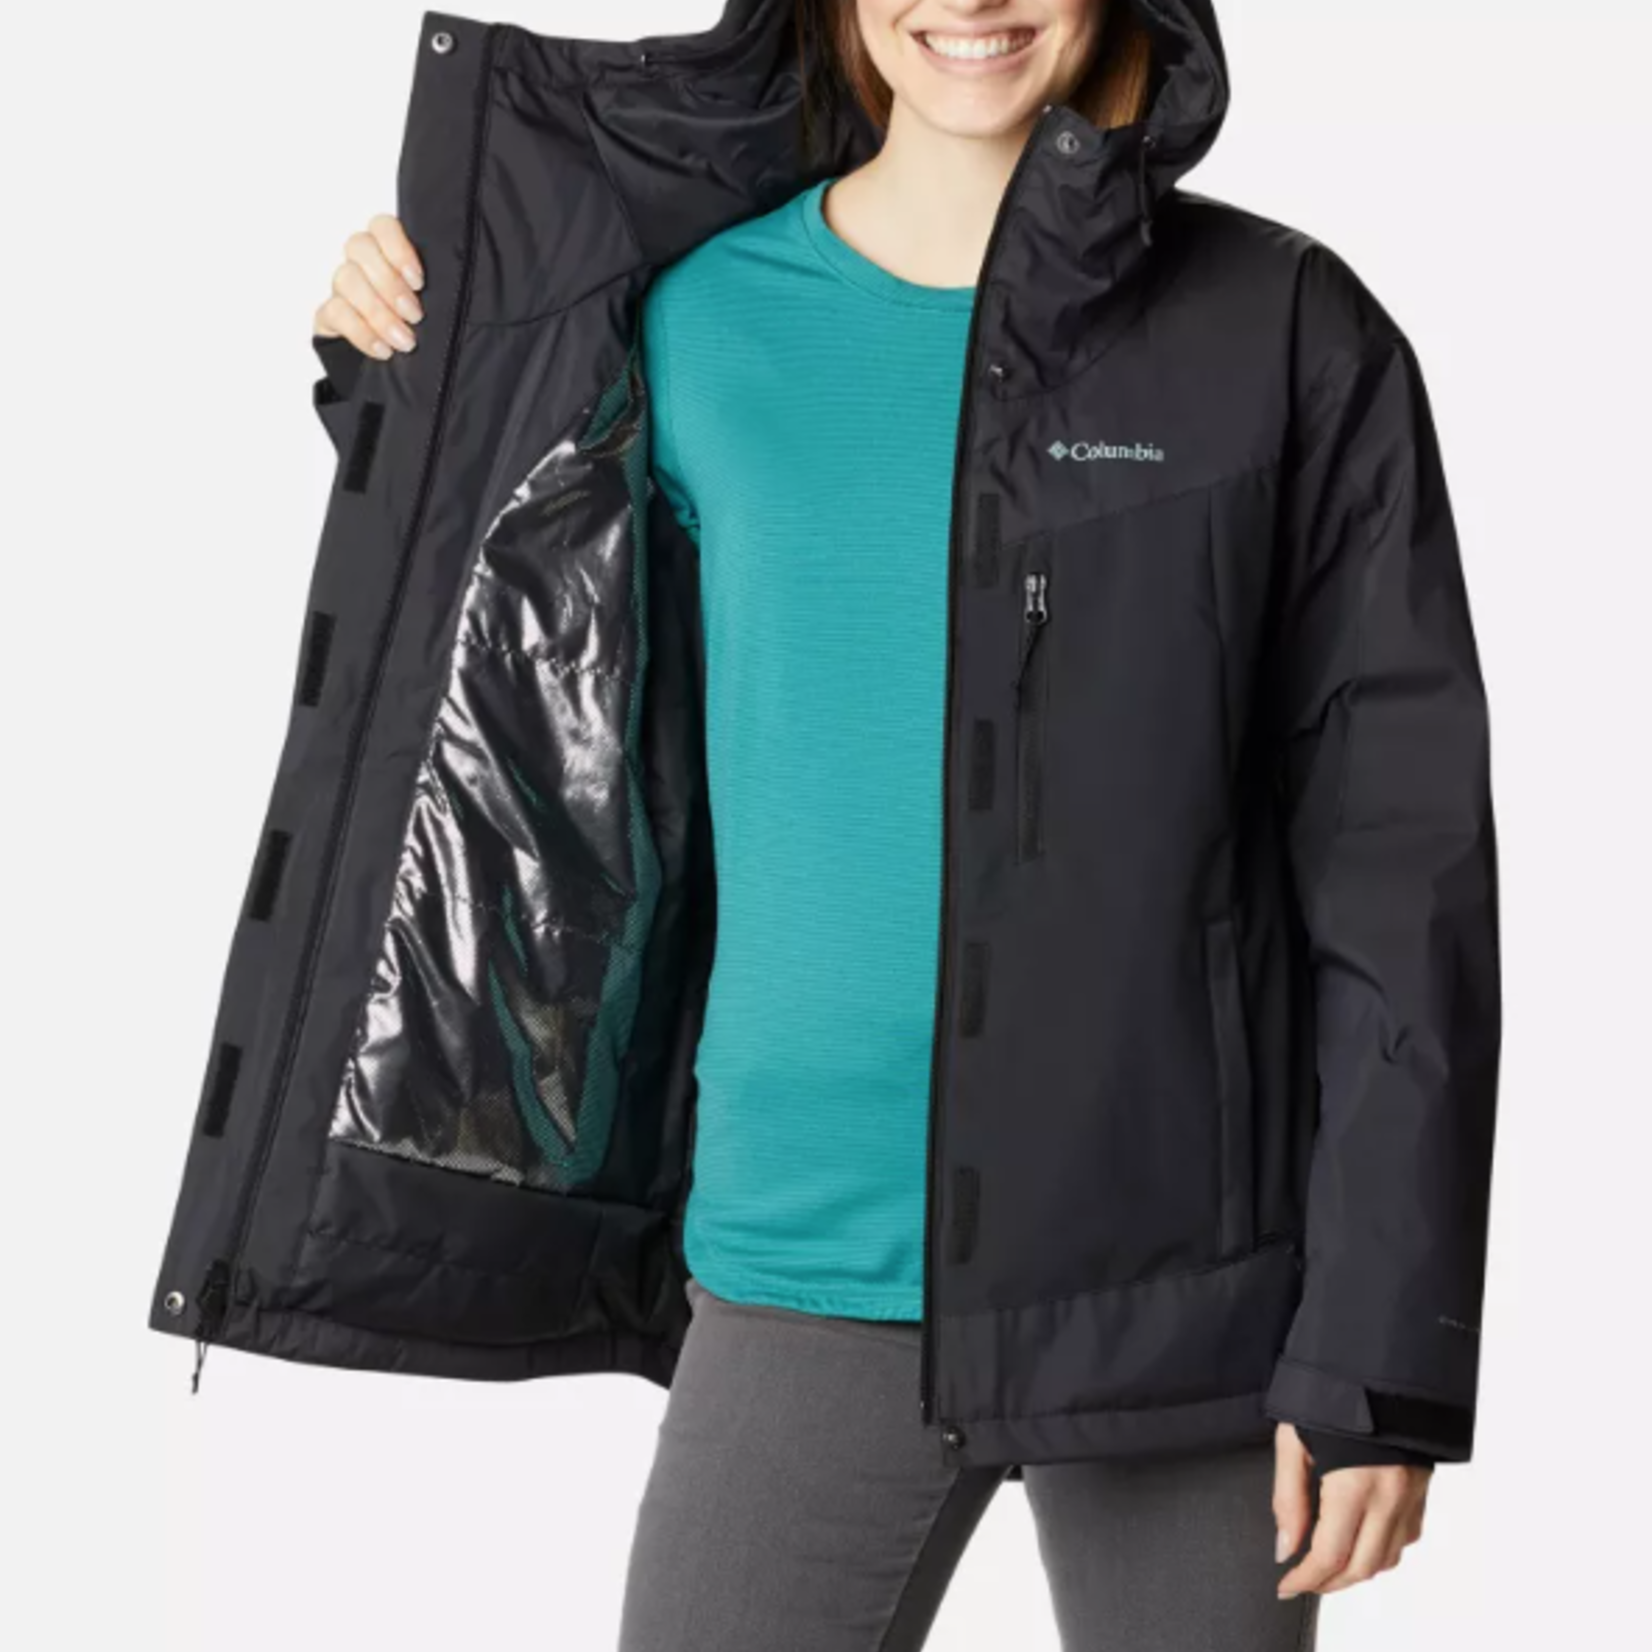 Columbia Columbia Winter Jacket, Point Park Insulated, Ladies